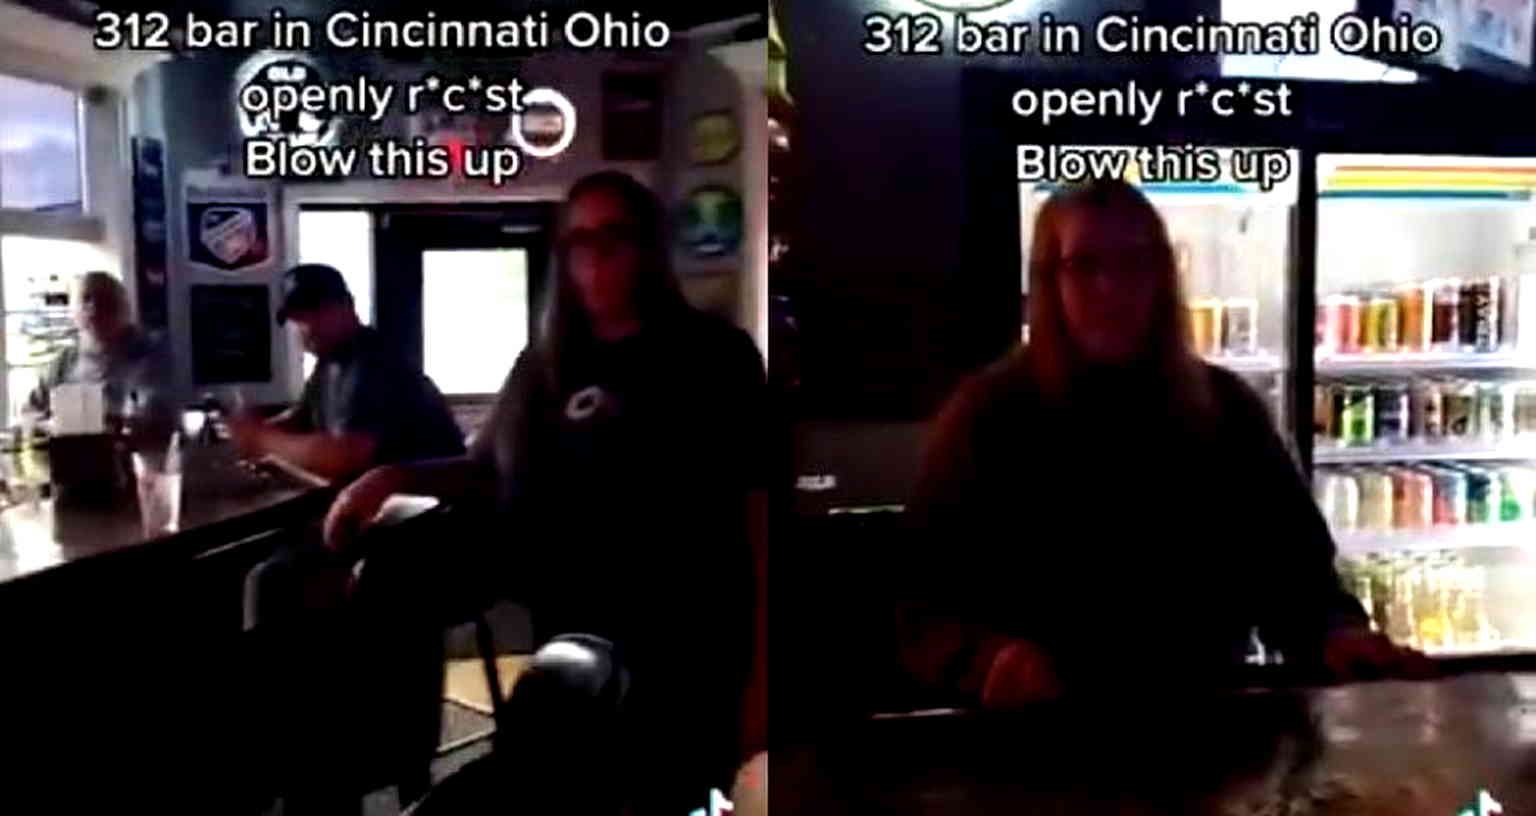 ‘Put that on TikTok so Chinese can look at that’: Cincinnati bar says ‘yes’ to racism in viral video